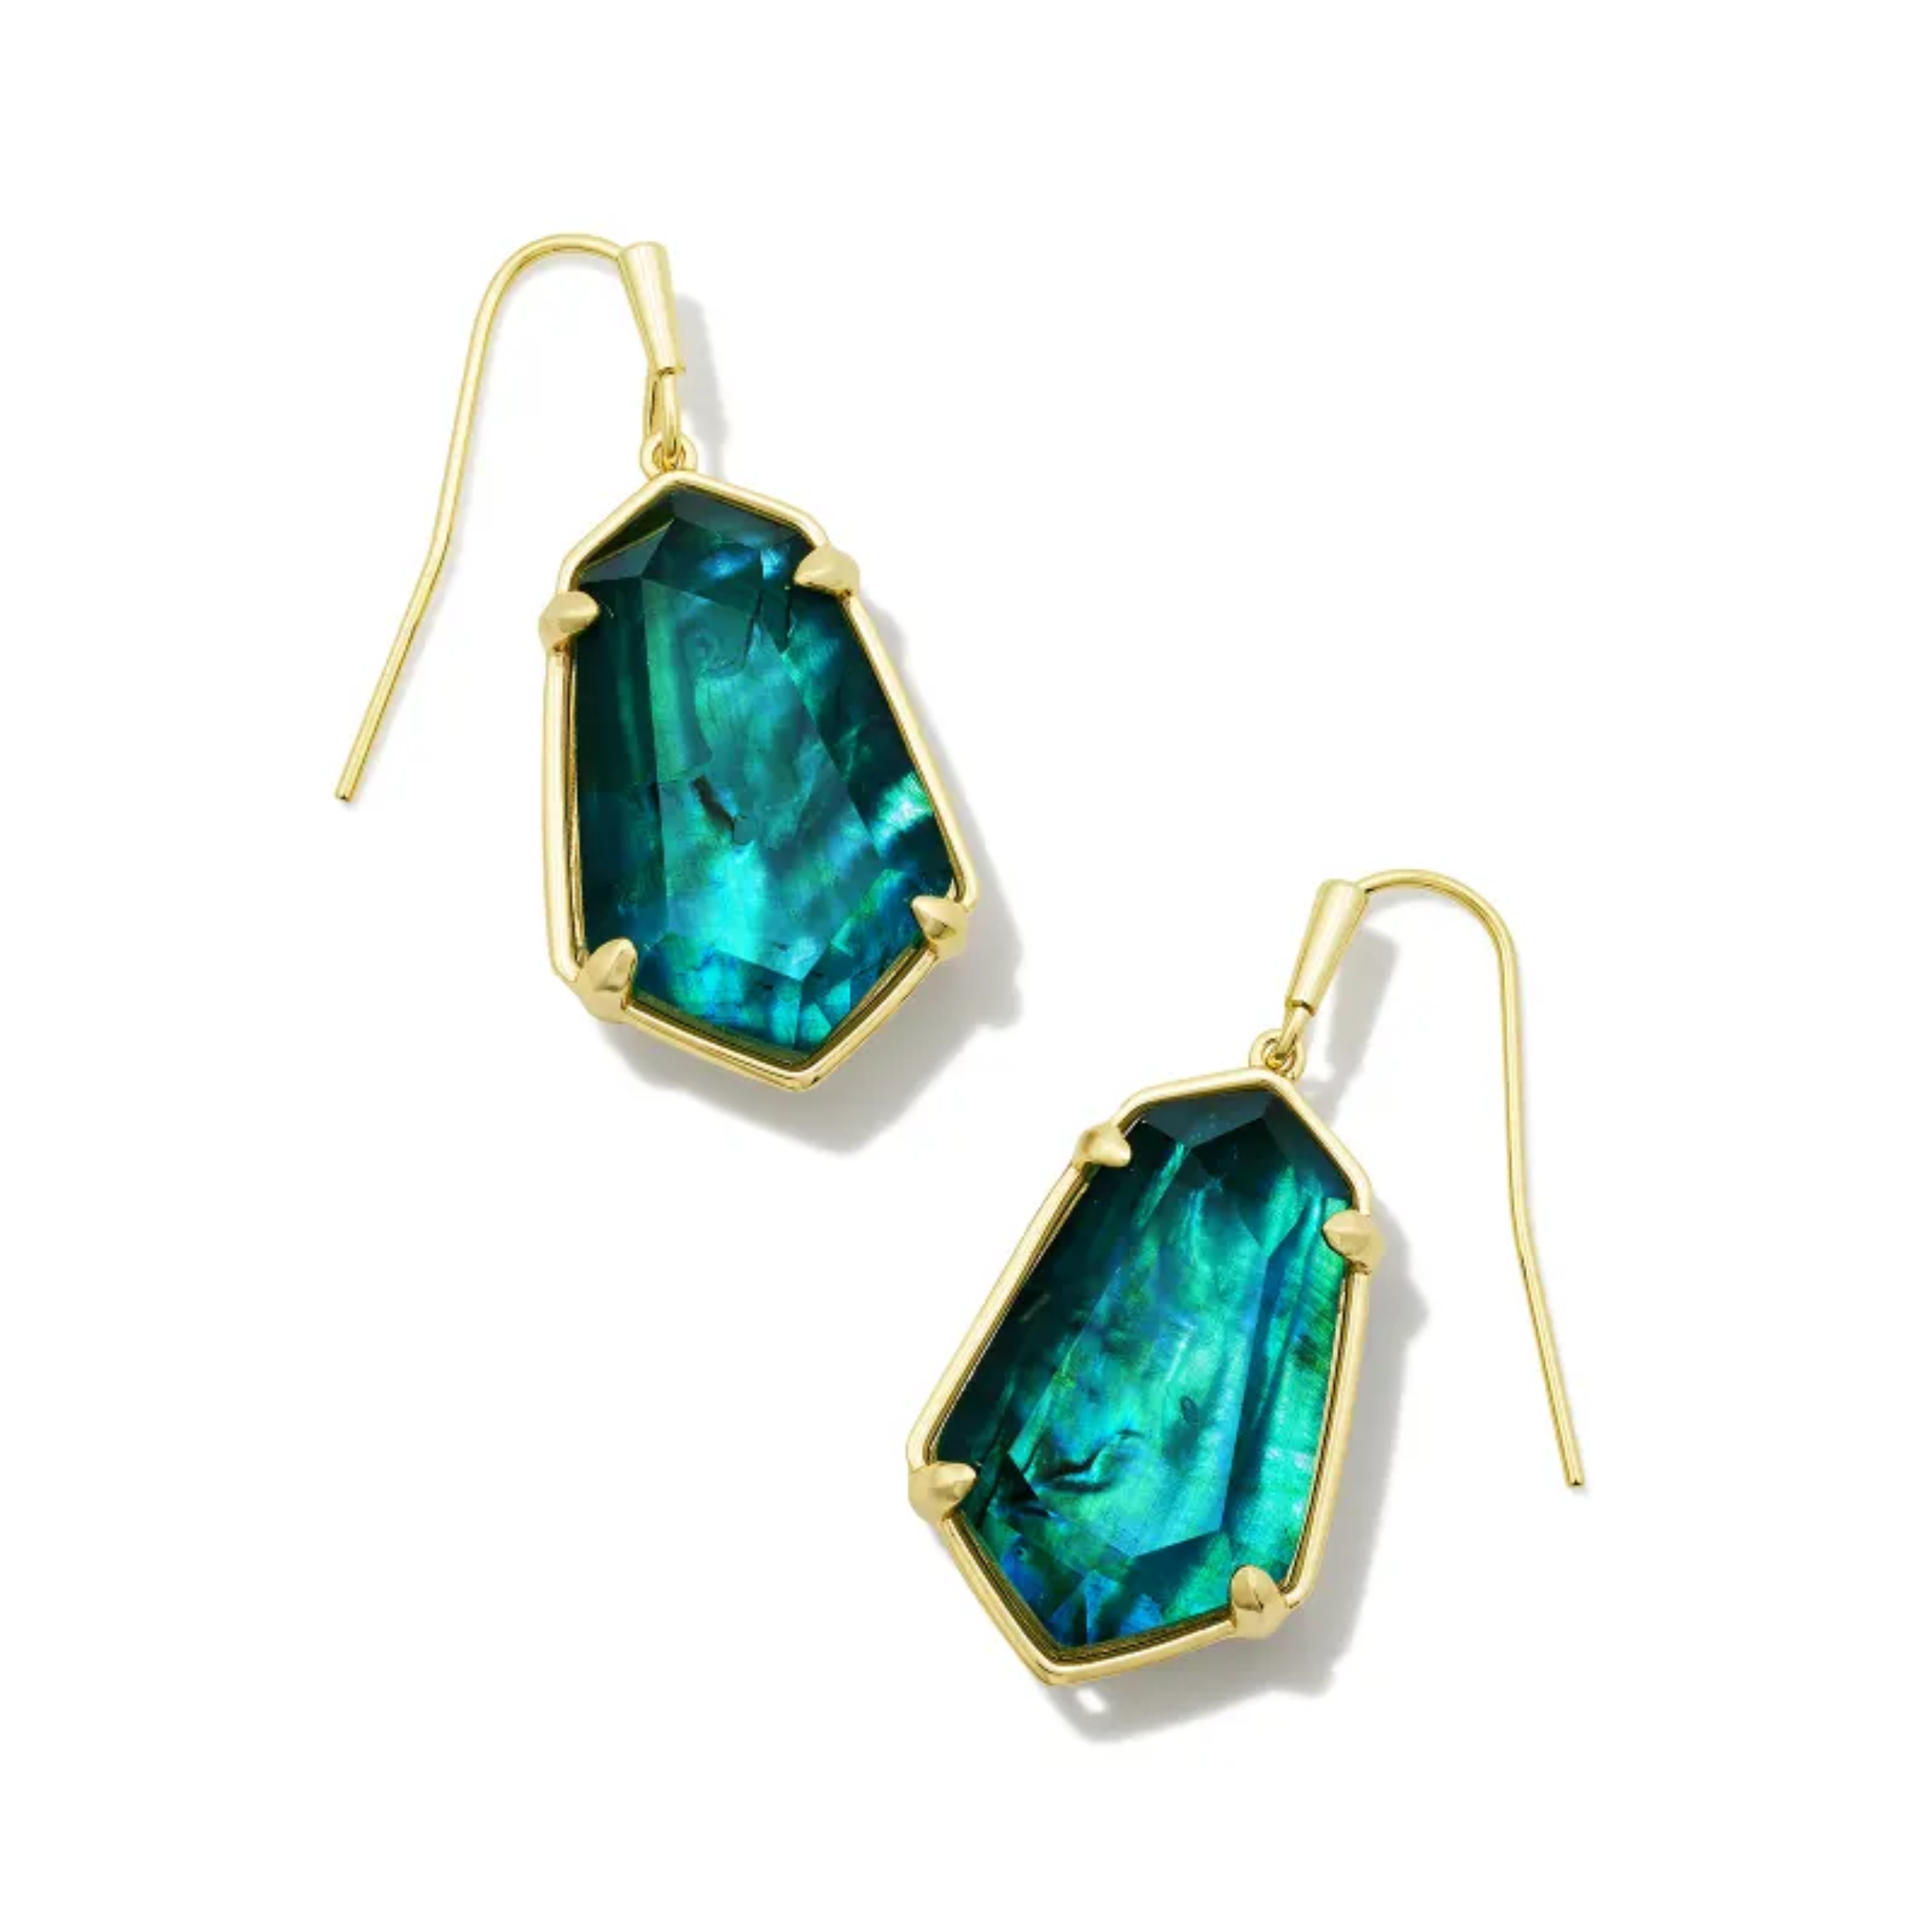 These Alexandria Gold Drop Earrings in Teal Green Illusion by Kendra Scott are pictured on a white background.